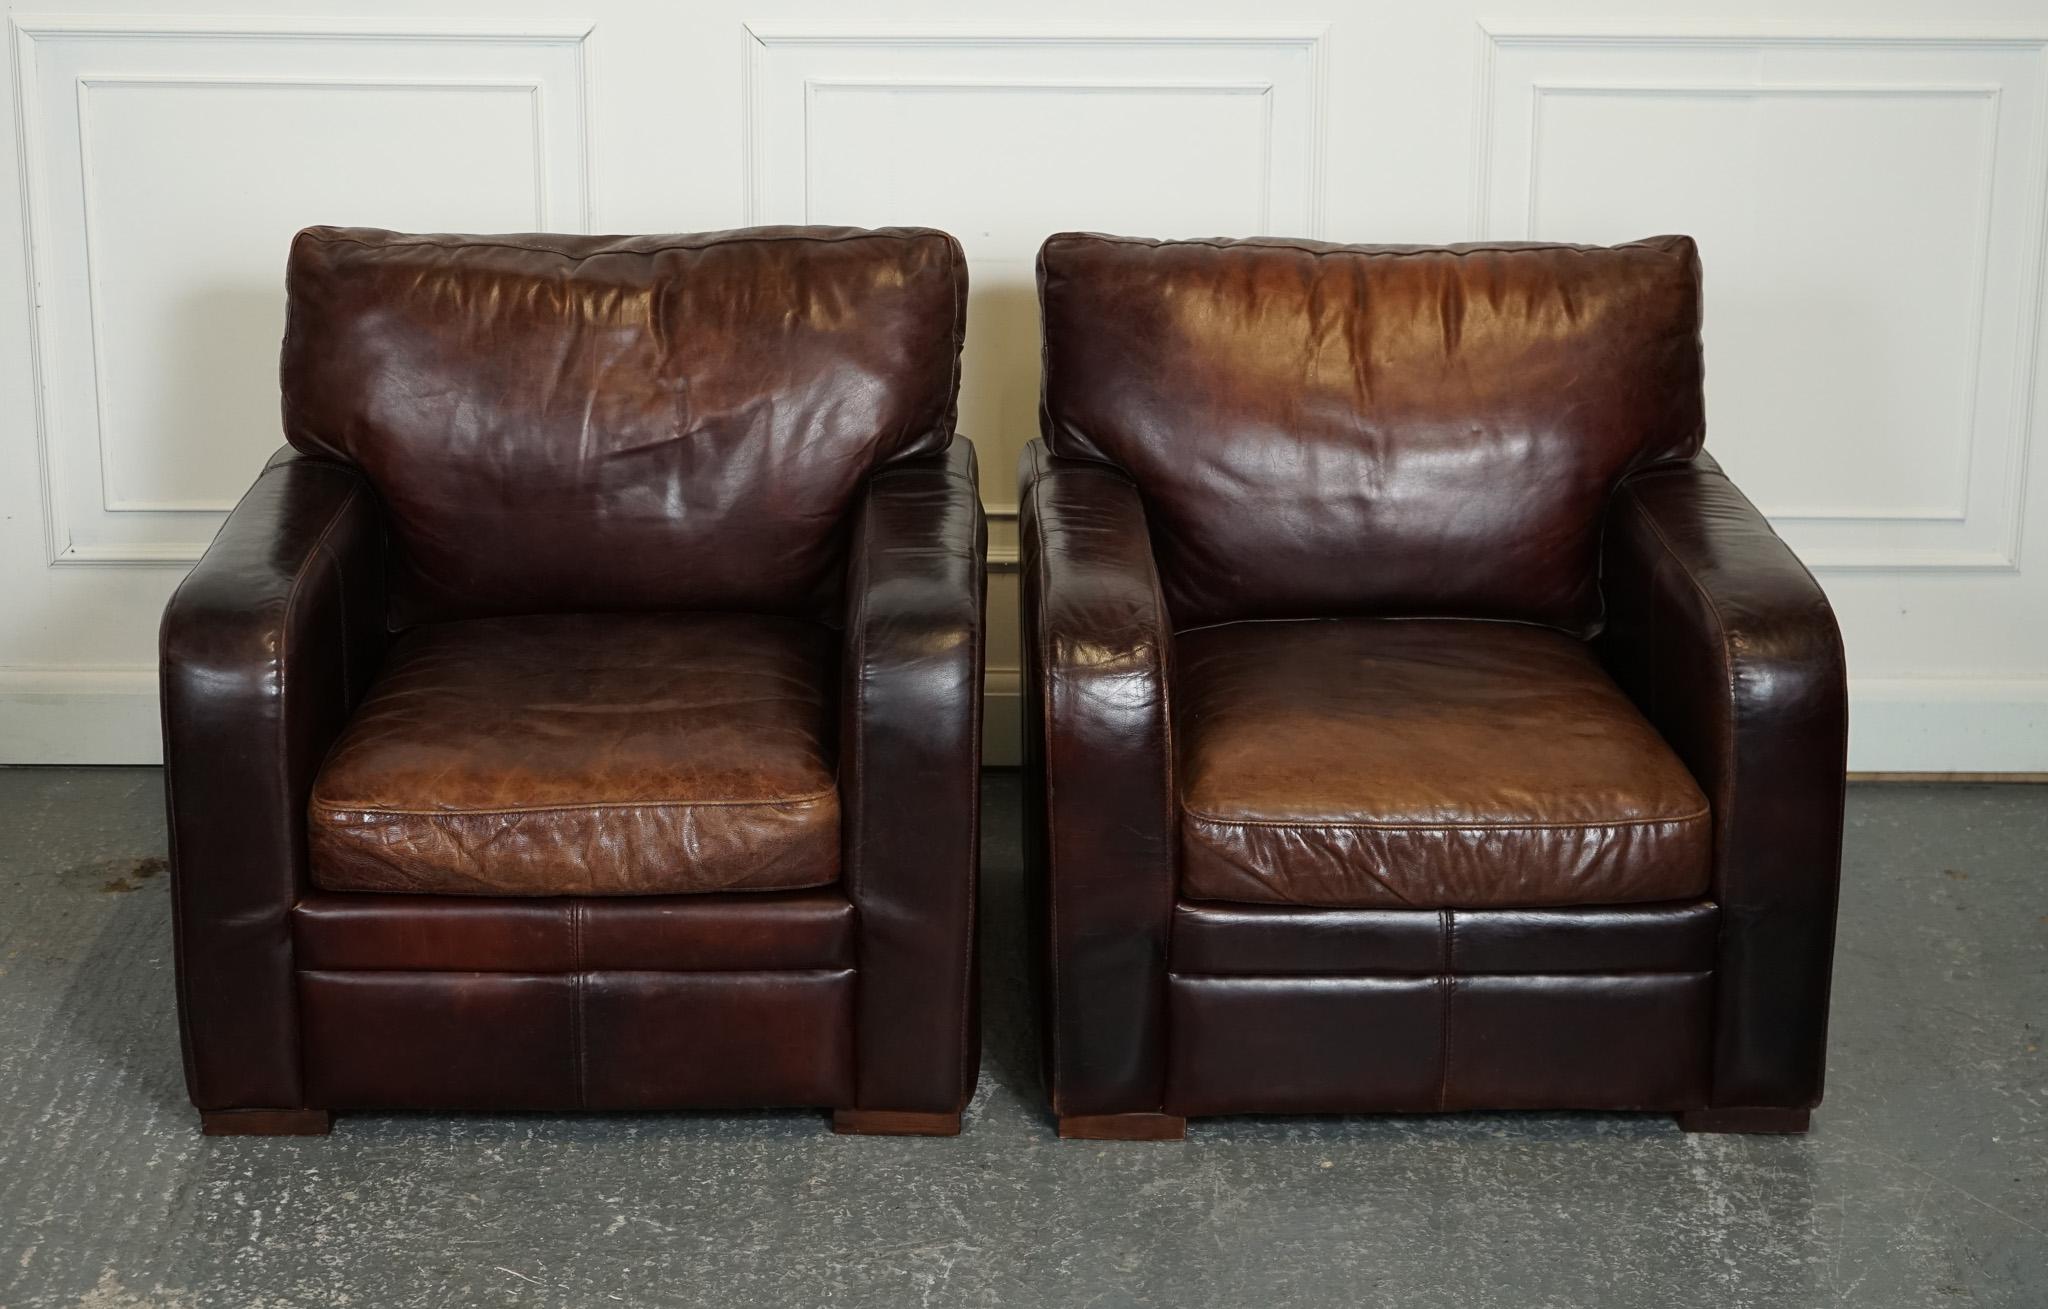 
We are delighted to offer for sale These Stunning Pair Of Halo Heritage Brown Leather Club Armchairs.

One label on the chairs is missing, as shown on the pictures.

The stunning vintage pair of Halo Brown Aged Leather Club Armchairs is a true